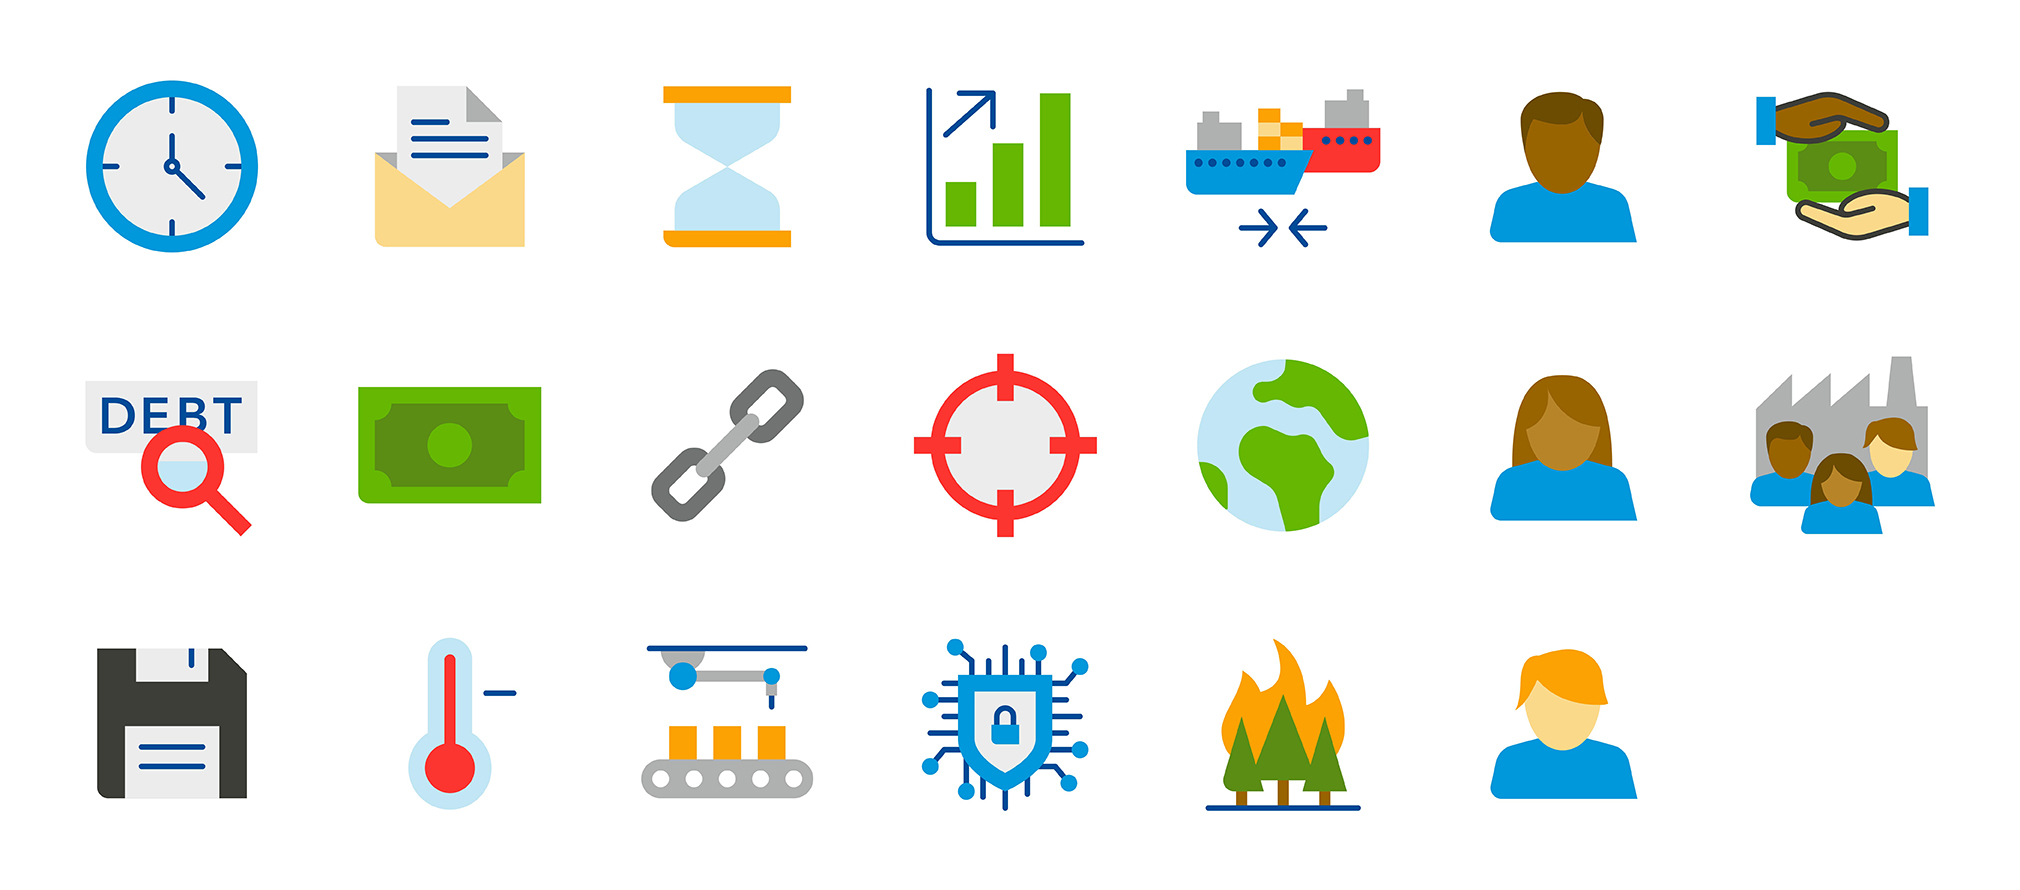 An overview of various icons created for the icon redesign project